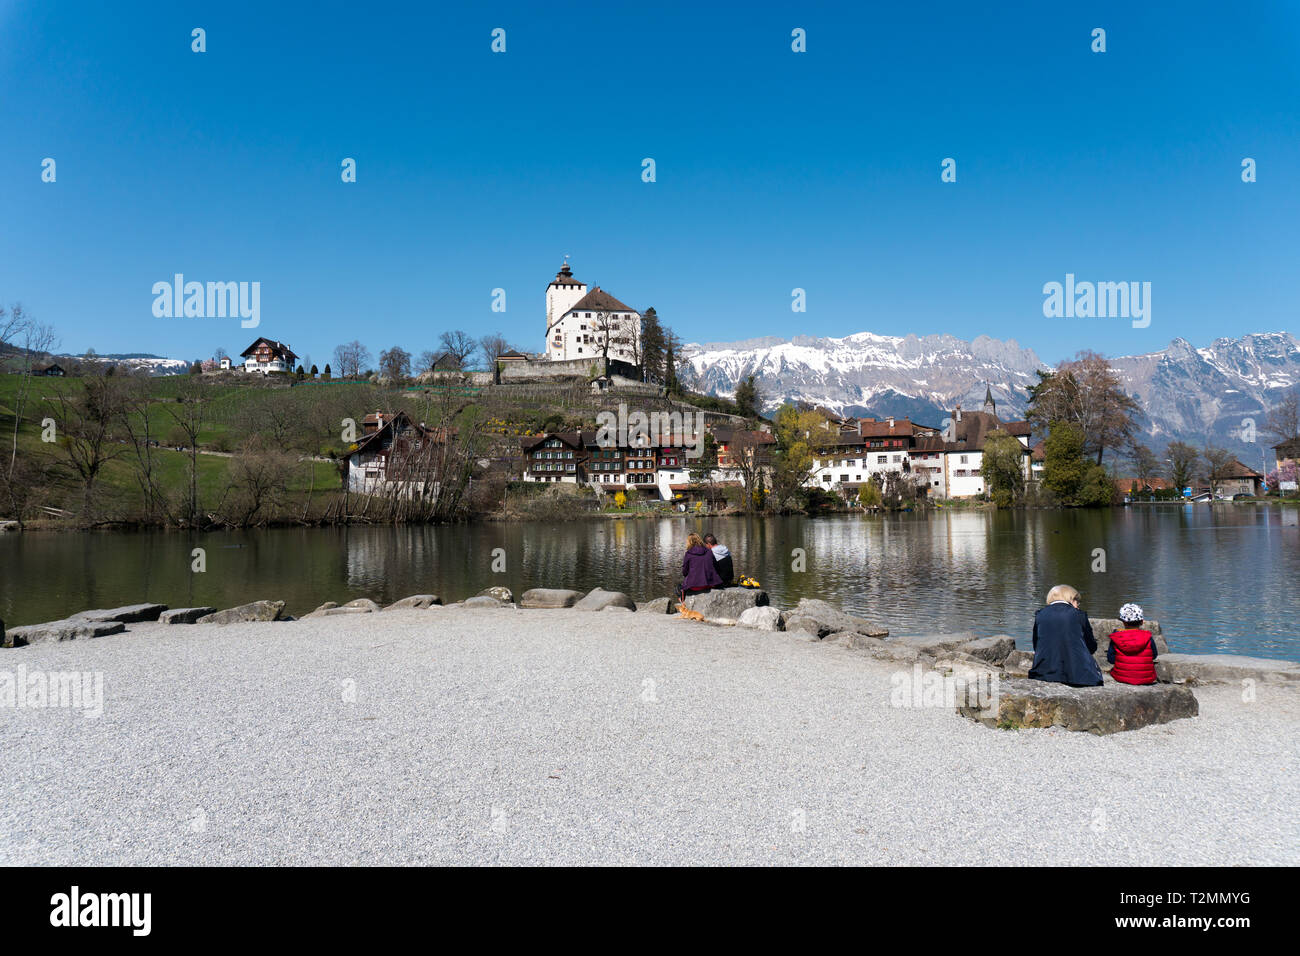 Werdenberg, SG / Switzerland - March 31, 2019: tourists enjoy a visit to idyllic and historic Werdenberg village and lake with a great view of the Swi Stock Photo